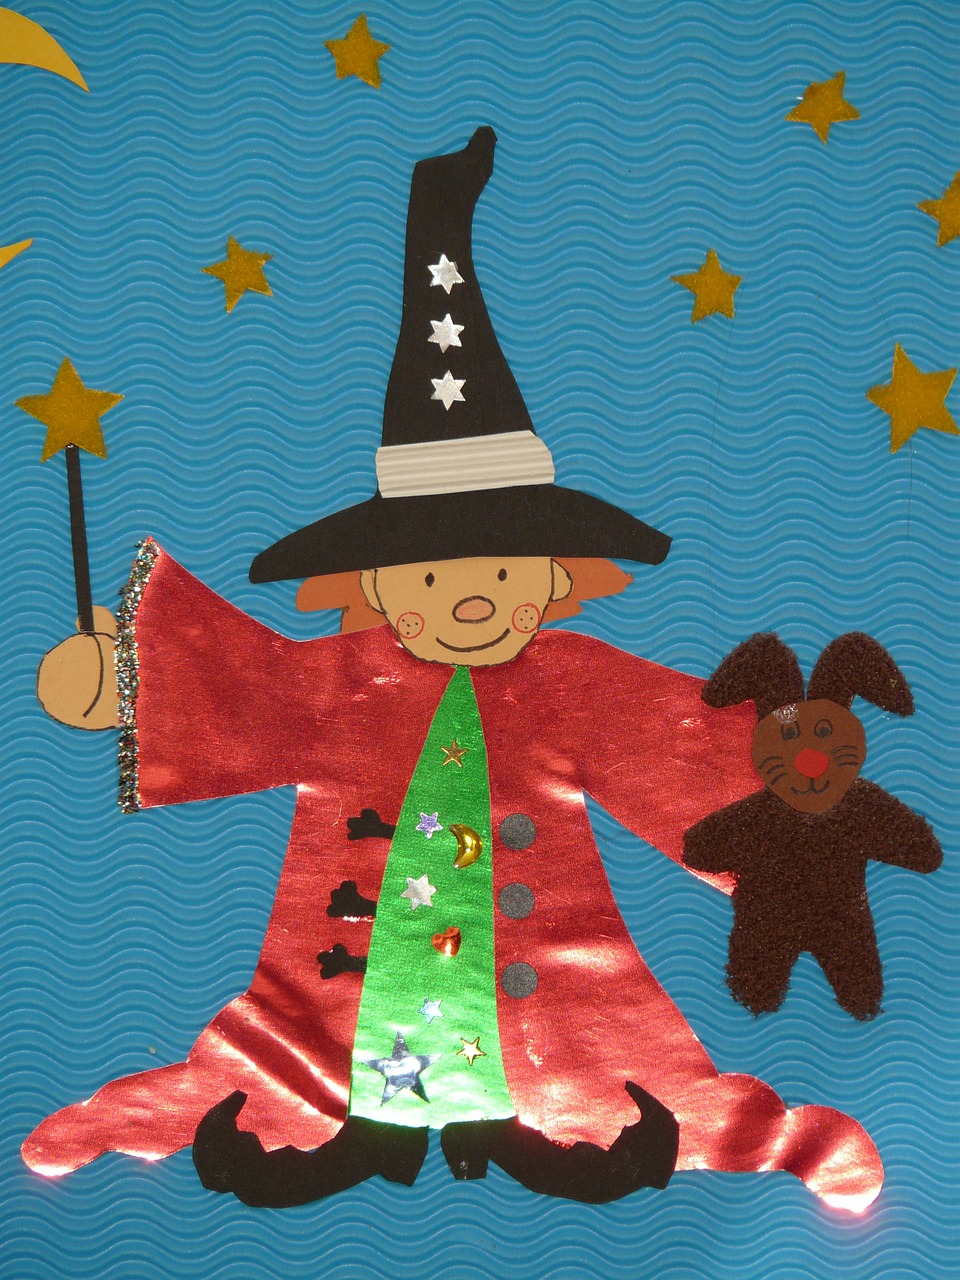 magician,wand,magic hat,conjure,tinker,paint,children,figure,free pictures, free photos, free images, royalty free, free illustrations, public domain